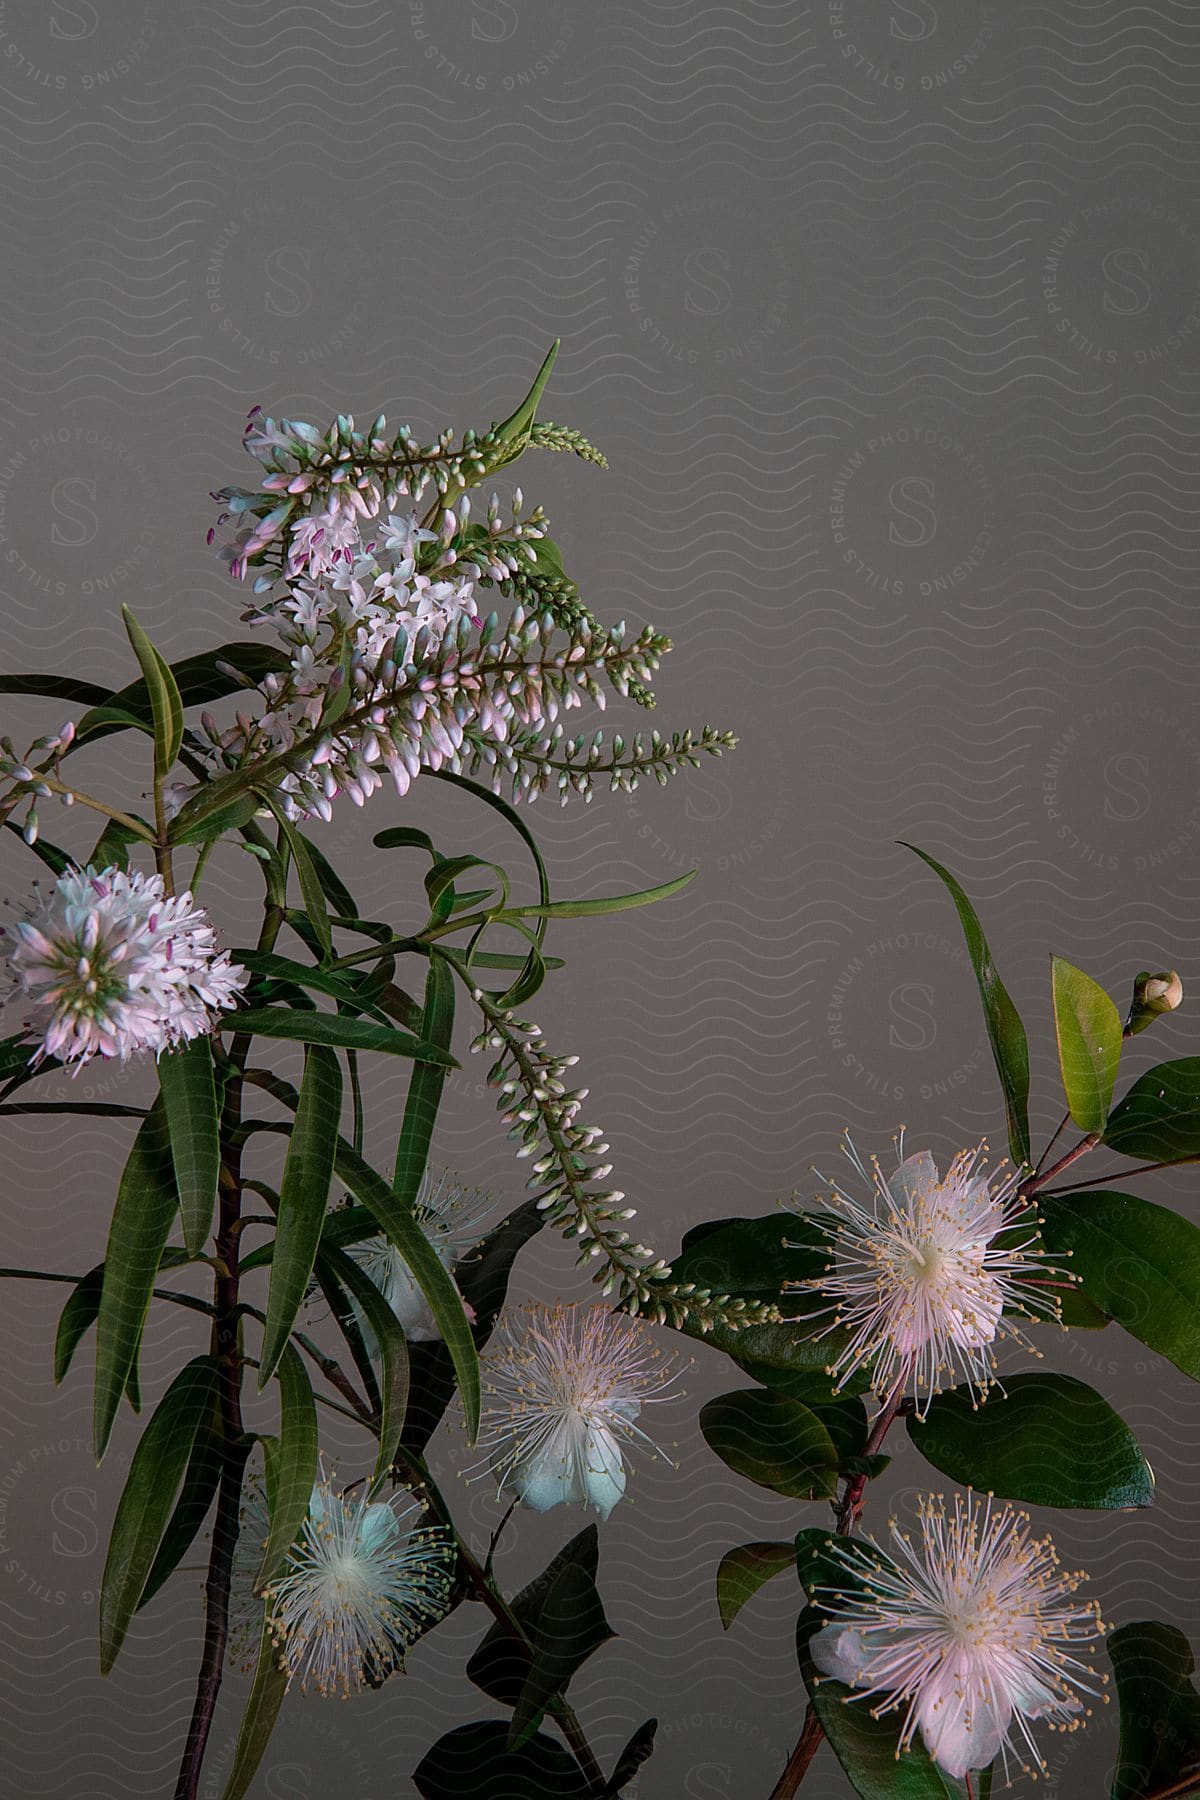 Boxleaf eugenia flower arrangements in a gray room.